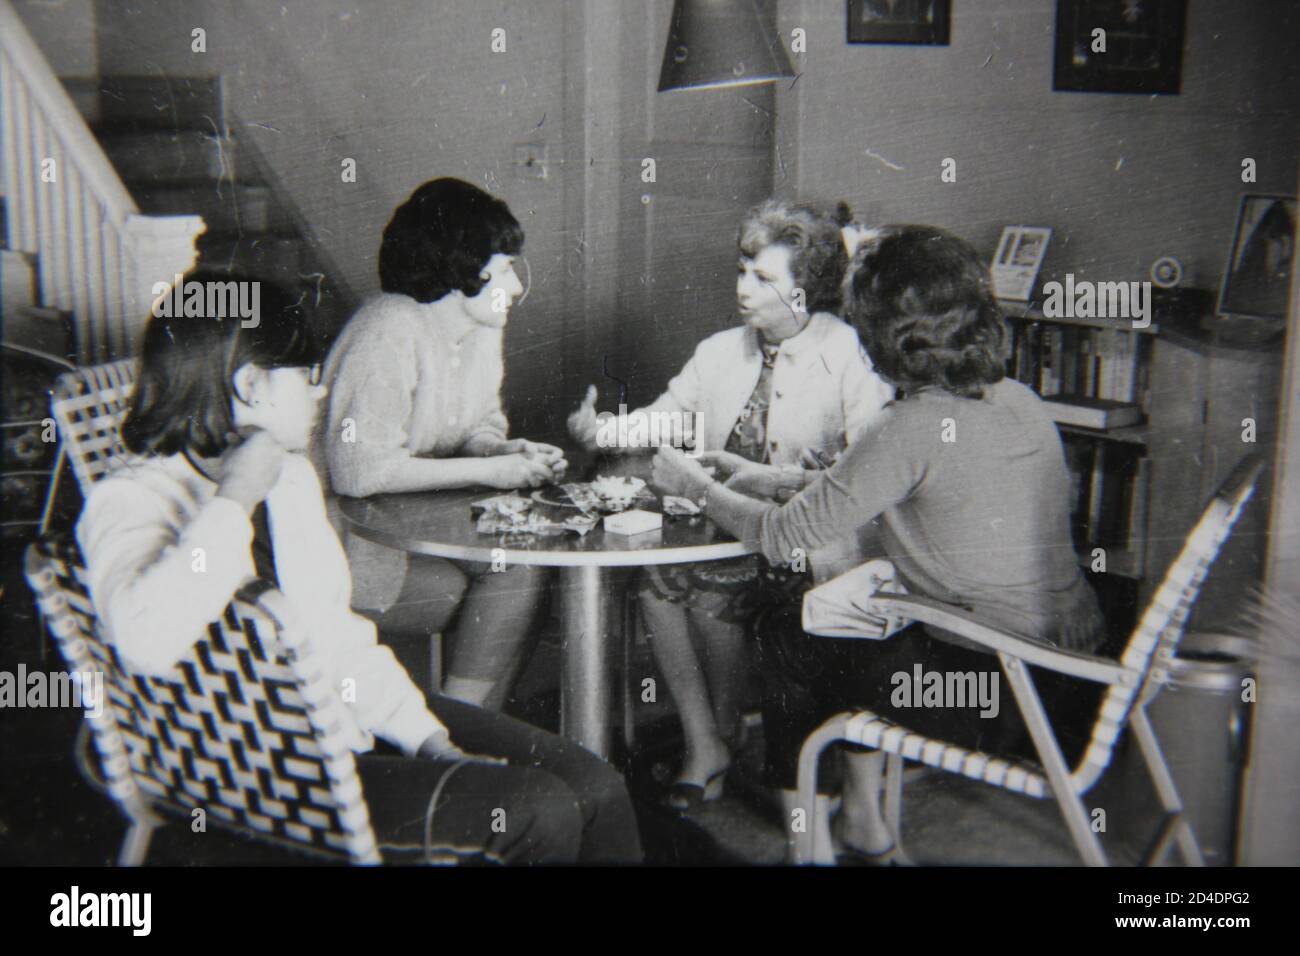 Fine 1970s vintage black and white photography of a casual gathering of girl friends in the kitchen for a cup of coffee. Stock Photo